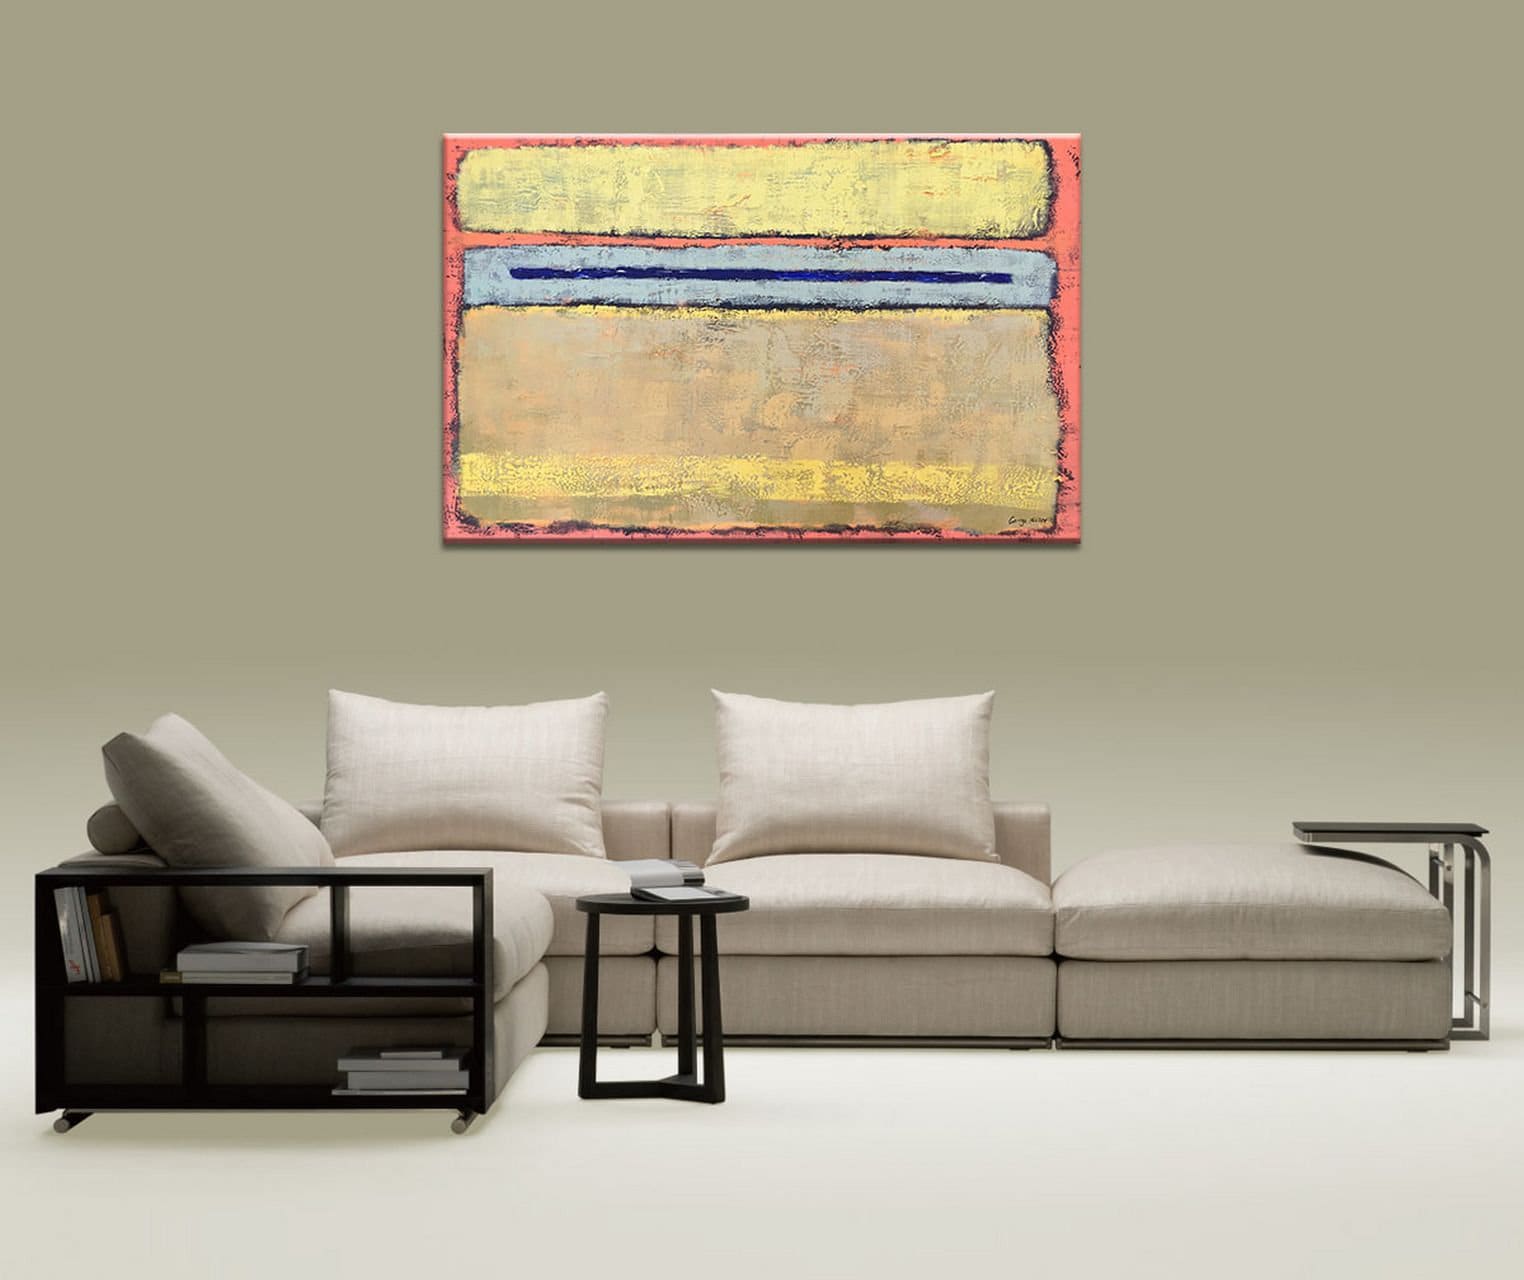 Art Painting -Abstract Painting, Original Oil Painting, Contemporary Painting, Canvas Wall Art, Canvas Art, Yellow, Pink, Large Abstract Art